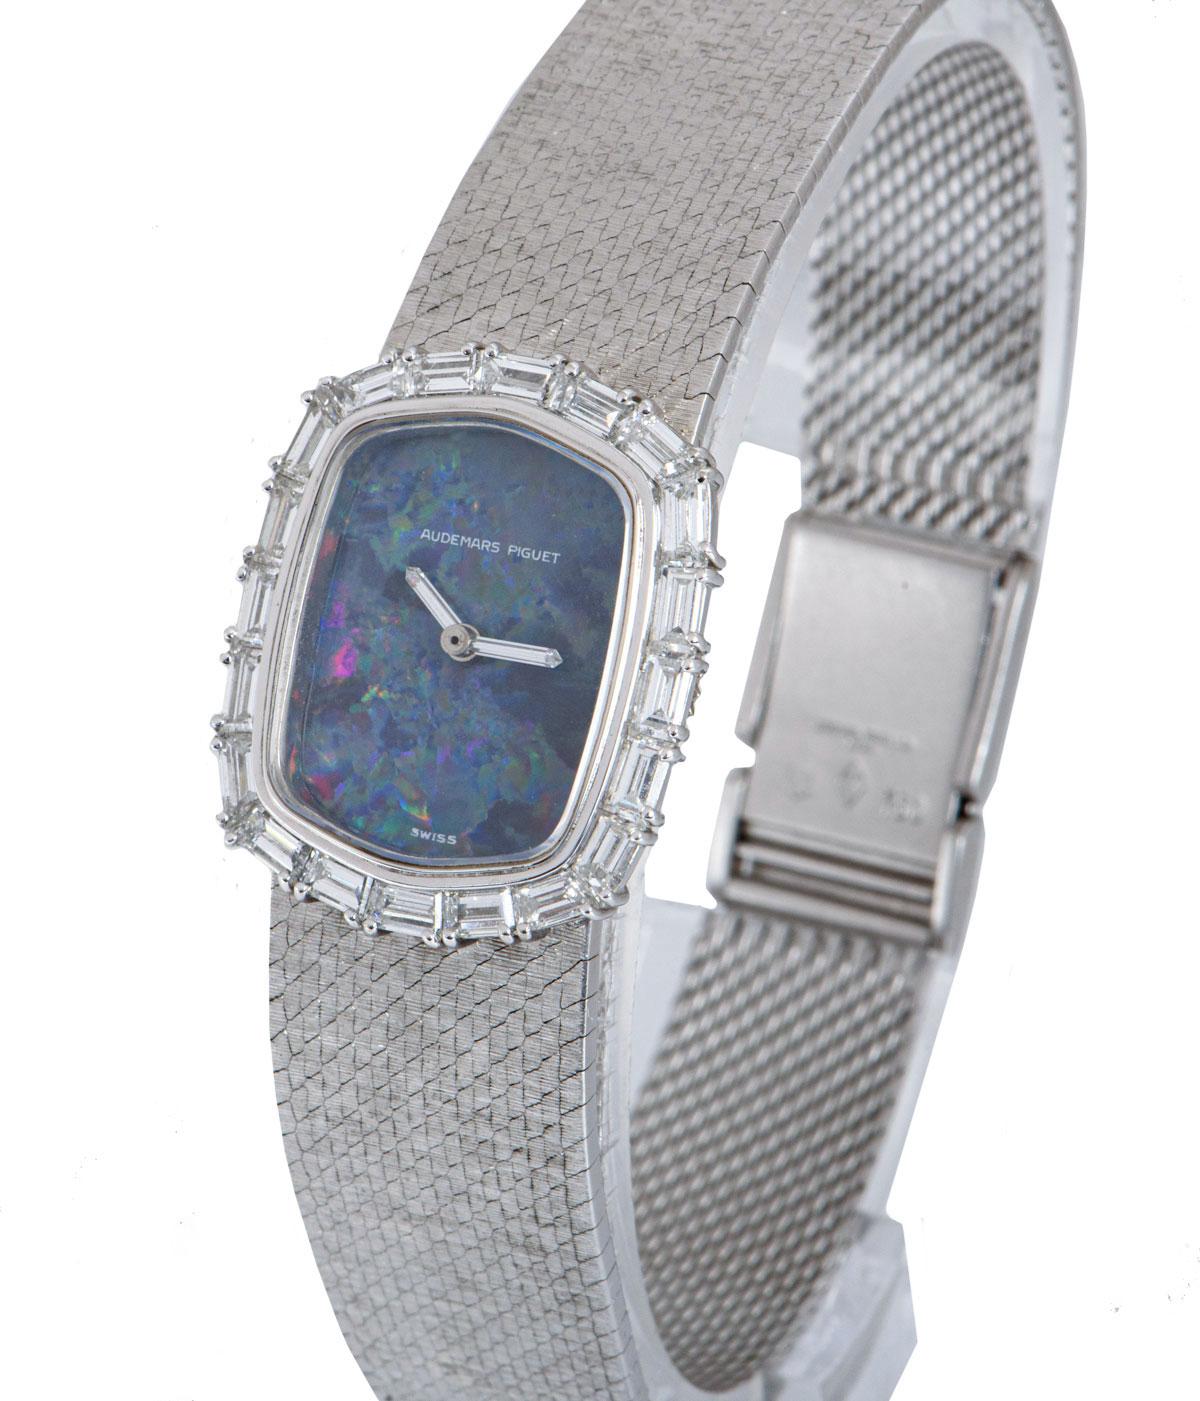 A rare 21mm women's cocktail dress wristwatch, by Audemars Piguet, crafted from 18k white gold and powered by a manual wind movement. 

The exquisite blue opal dial indicates time with baguette cut diamond set hands. Complementing this, is a fixed